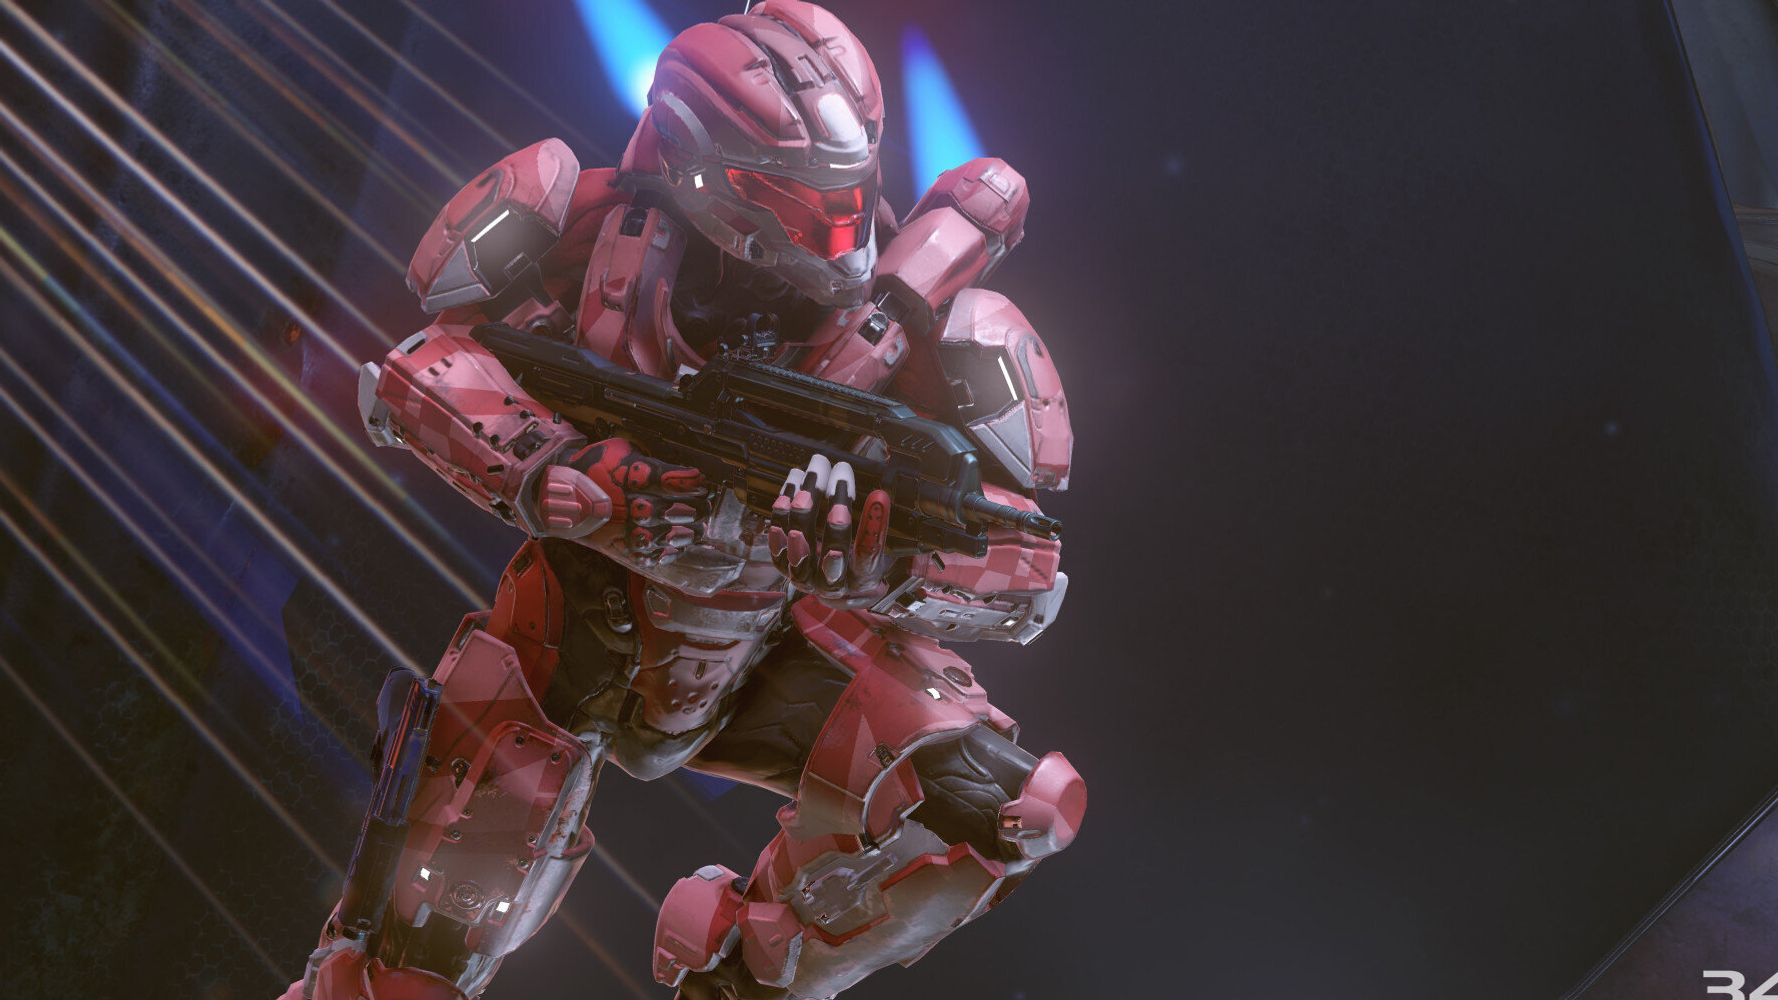 Halo 5: Guardians is released - Microsoft News Centre UK